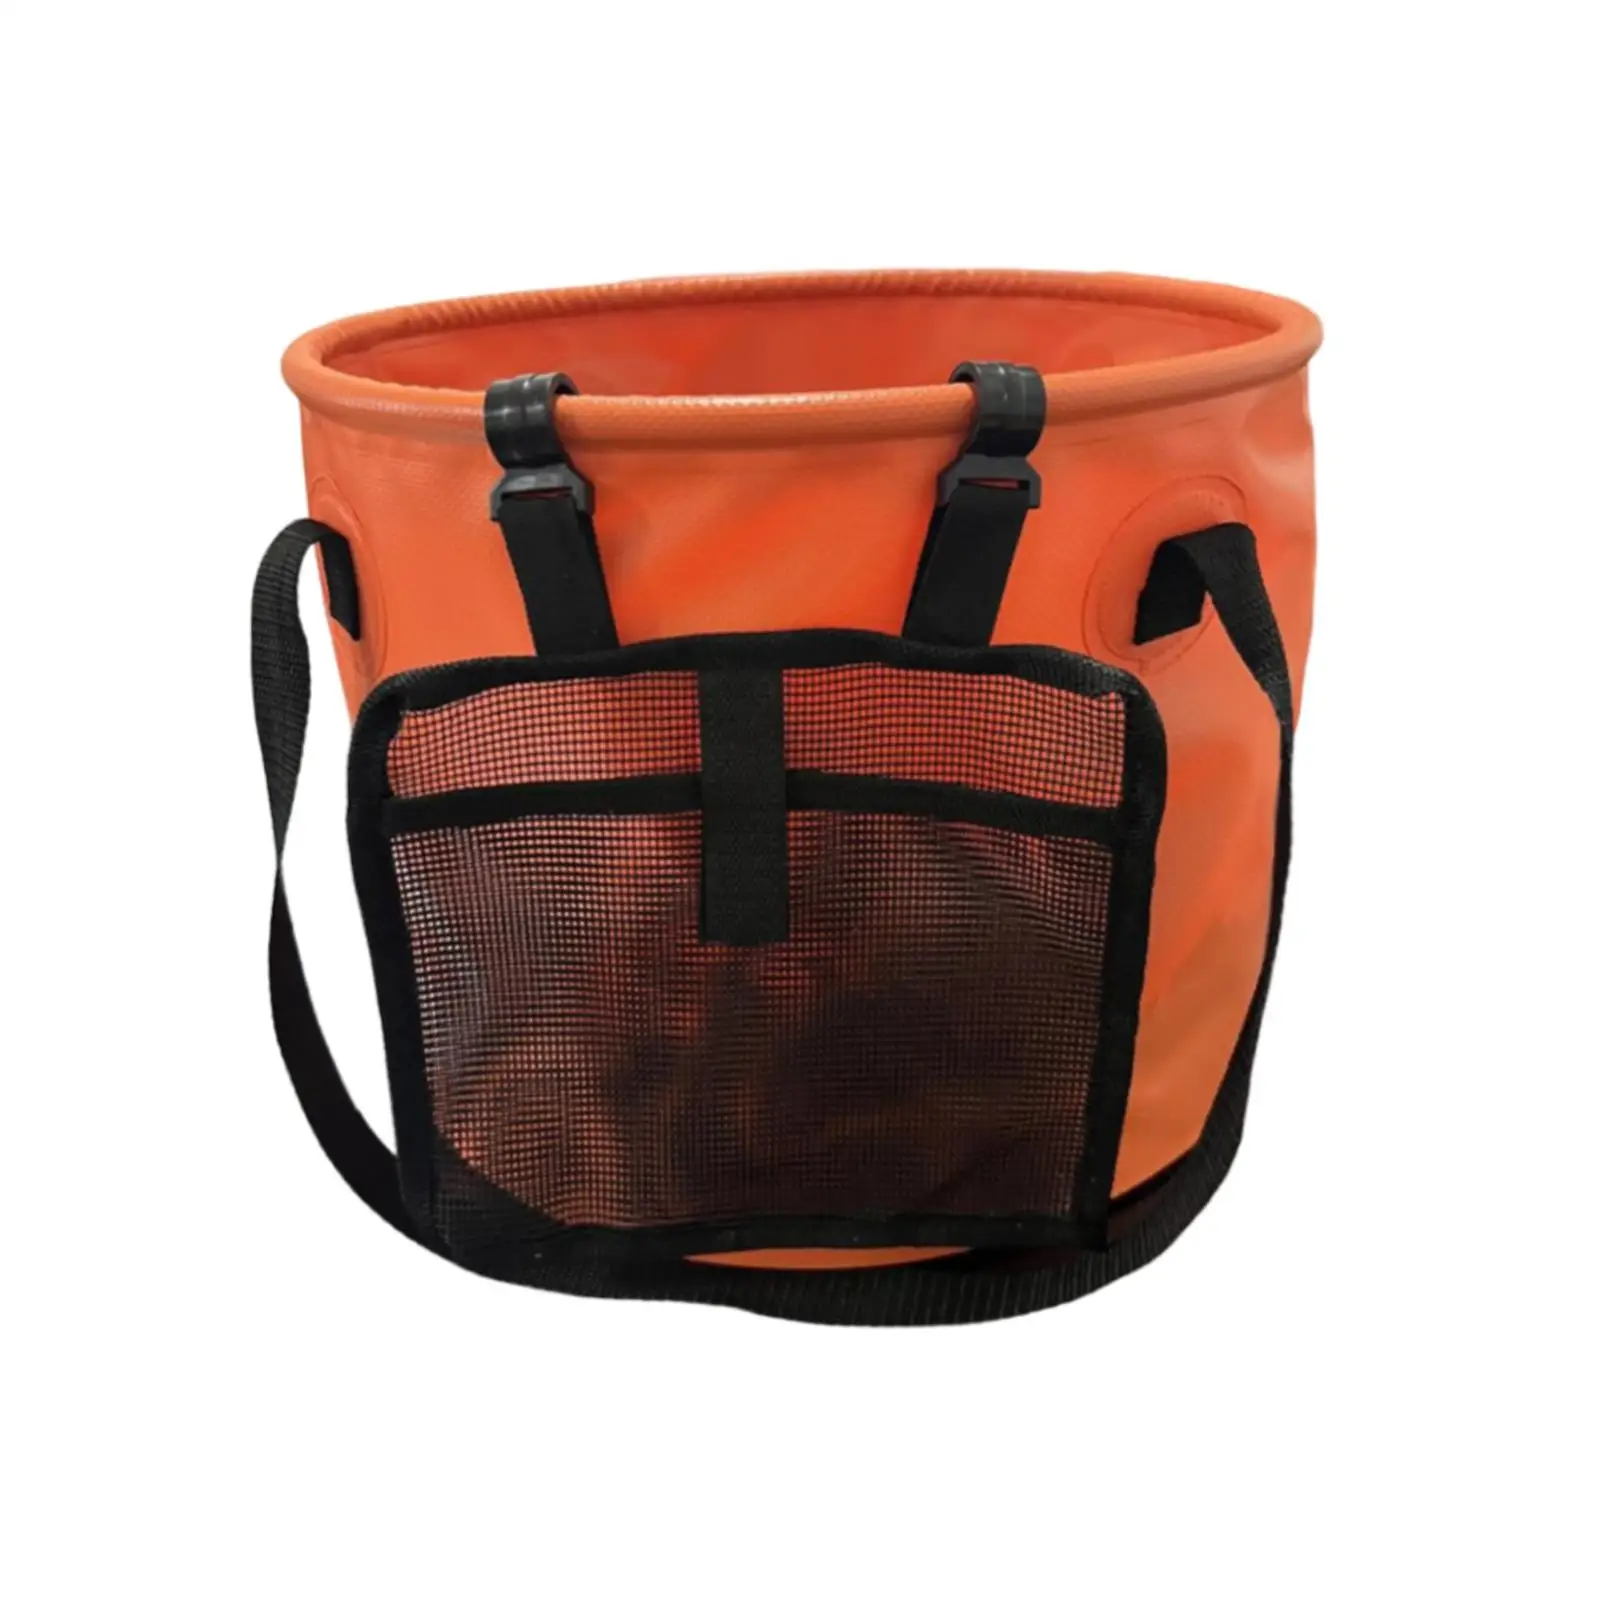 Water Container Water Bag Travel Collapsible Bucket for Hiking Boating Beach